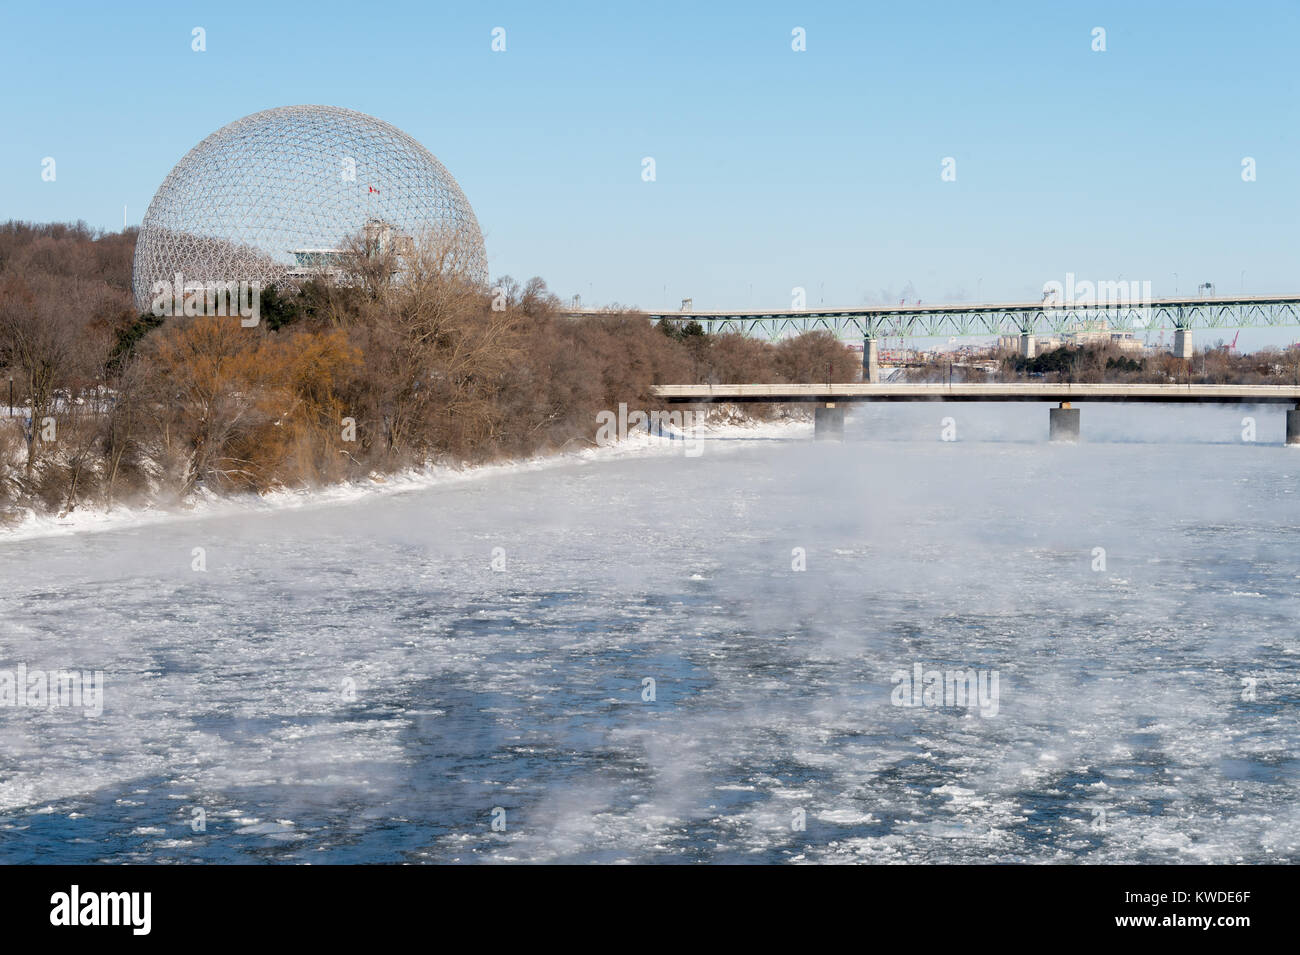 Montreal, CA - 1 January 2018: Montreal in winter, Biosphere in Parc Jean Drapeau as ice fog rises off the St. Lawrence River Stock Photo